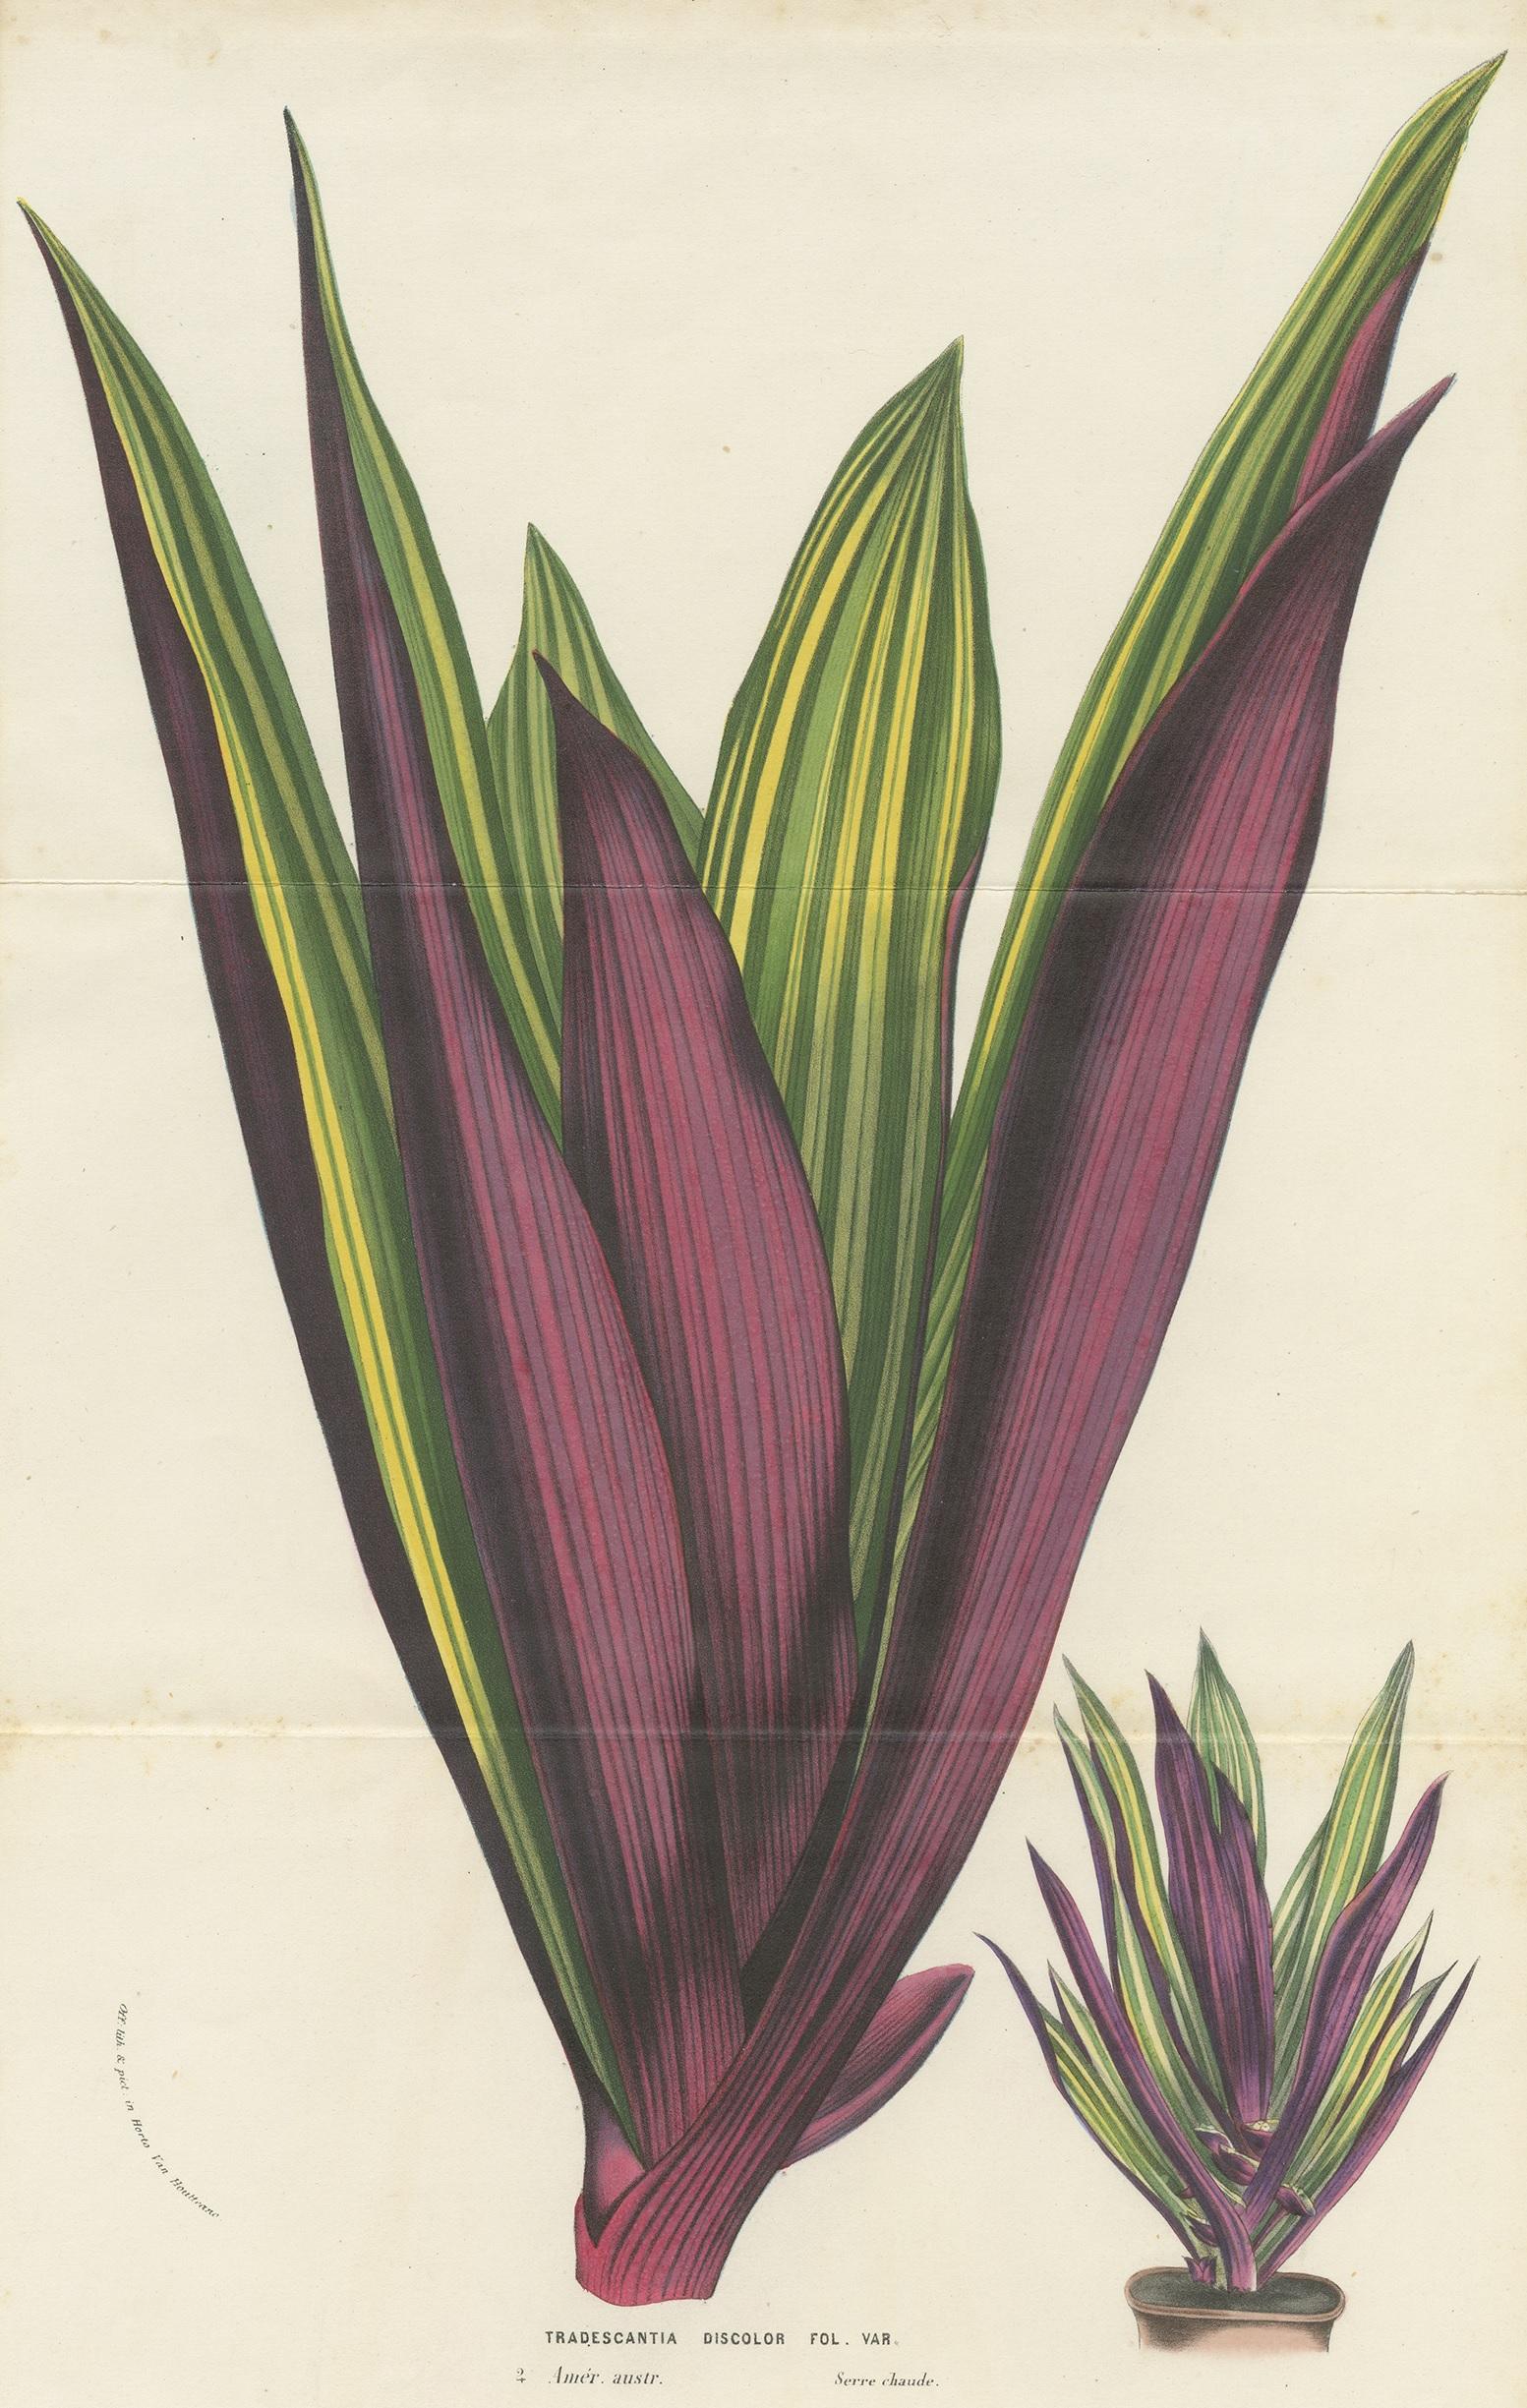 Antique botany print titled 'Tradescantia Discolor'. Lithograph of tradescantia spathacea, the boatlily, or Moses-in-the-cradle. This print originates from volume 11 of 'Flore des serres et des jardins de l'Europe' by Louis van Houtte.